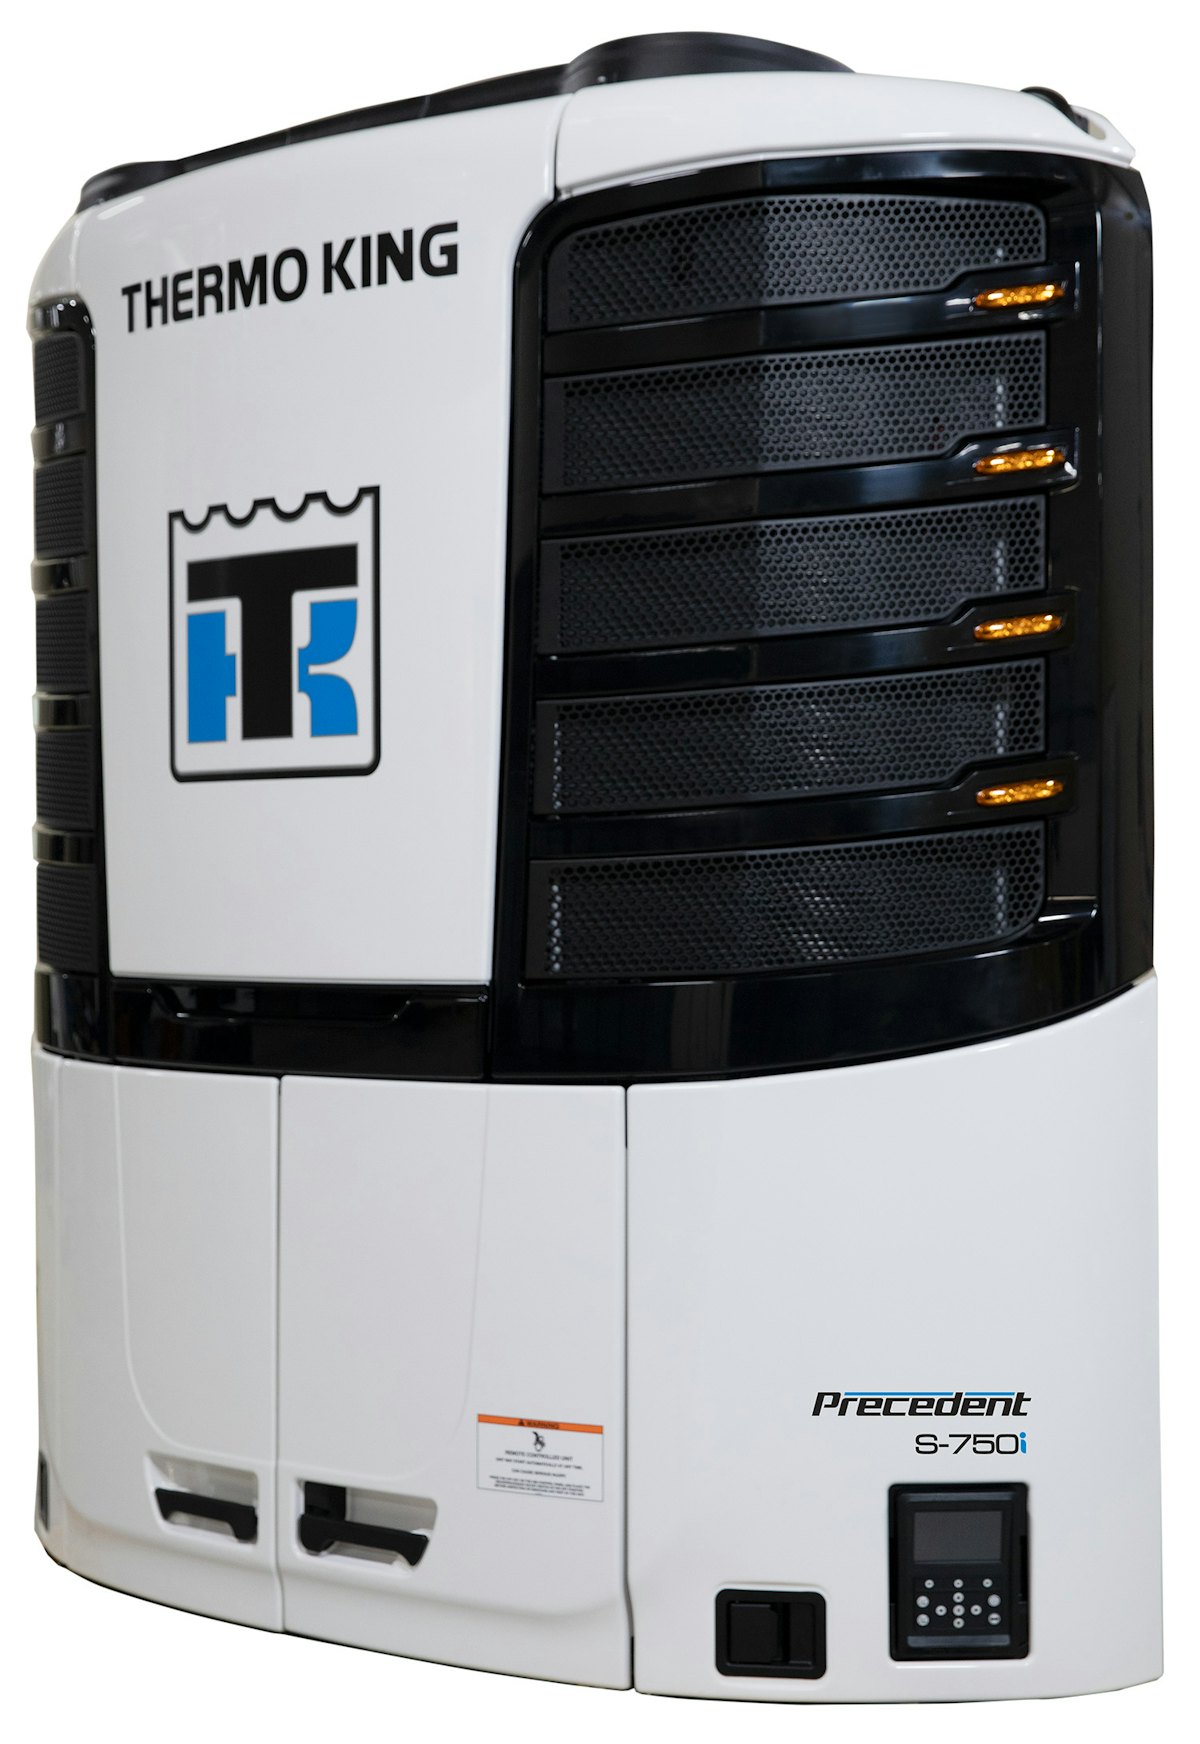 Thermo King - An innovative, connected, and energy efficient solution for  your cold chain logistics needs. Here's an inner look at what Thermo King's  Precedent s-750i unit looks like. Learn more